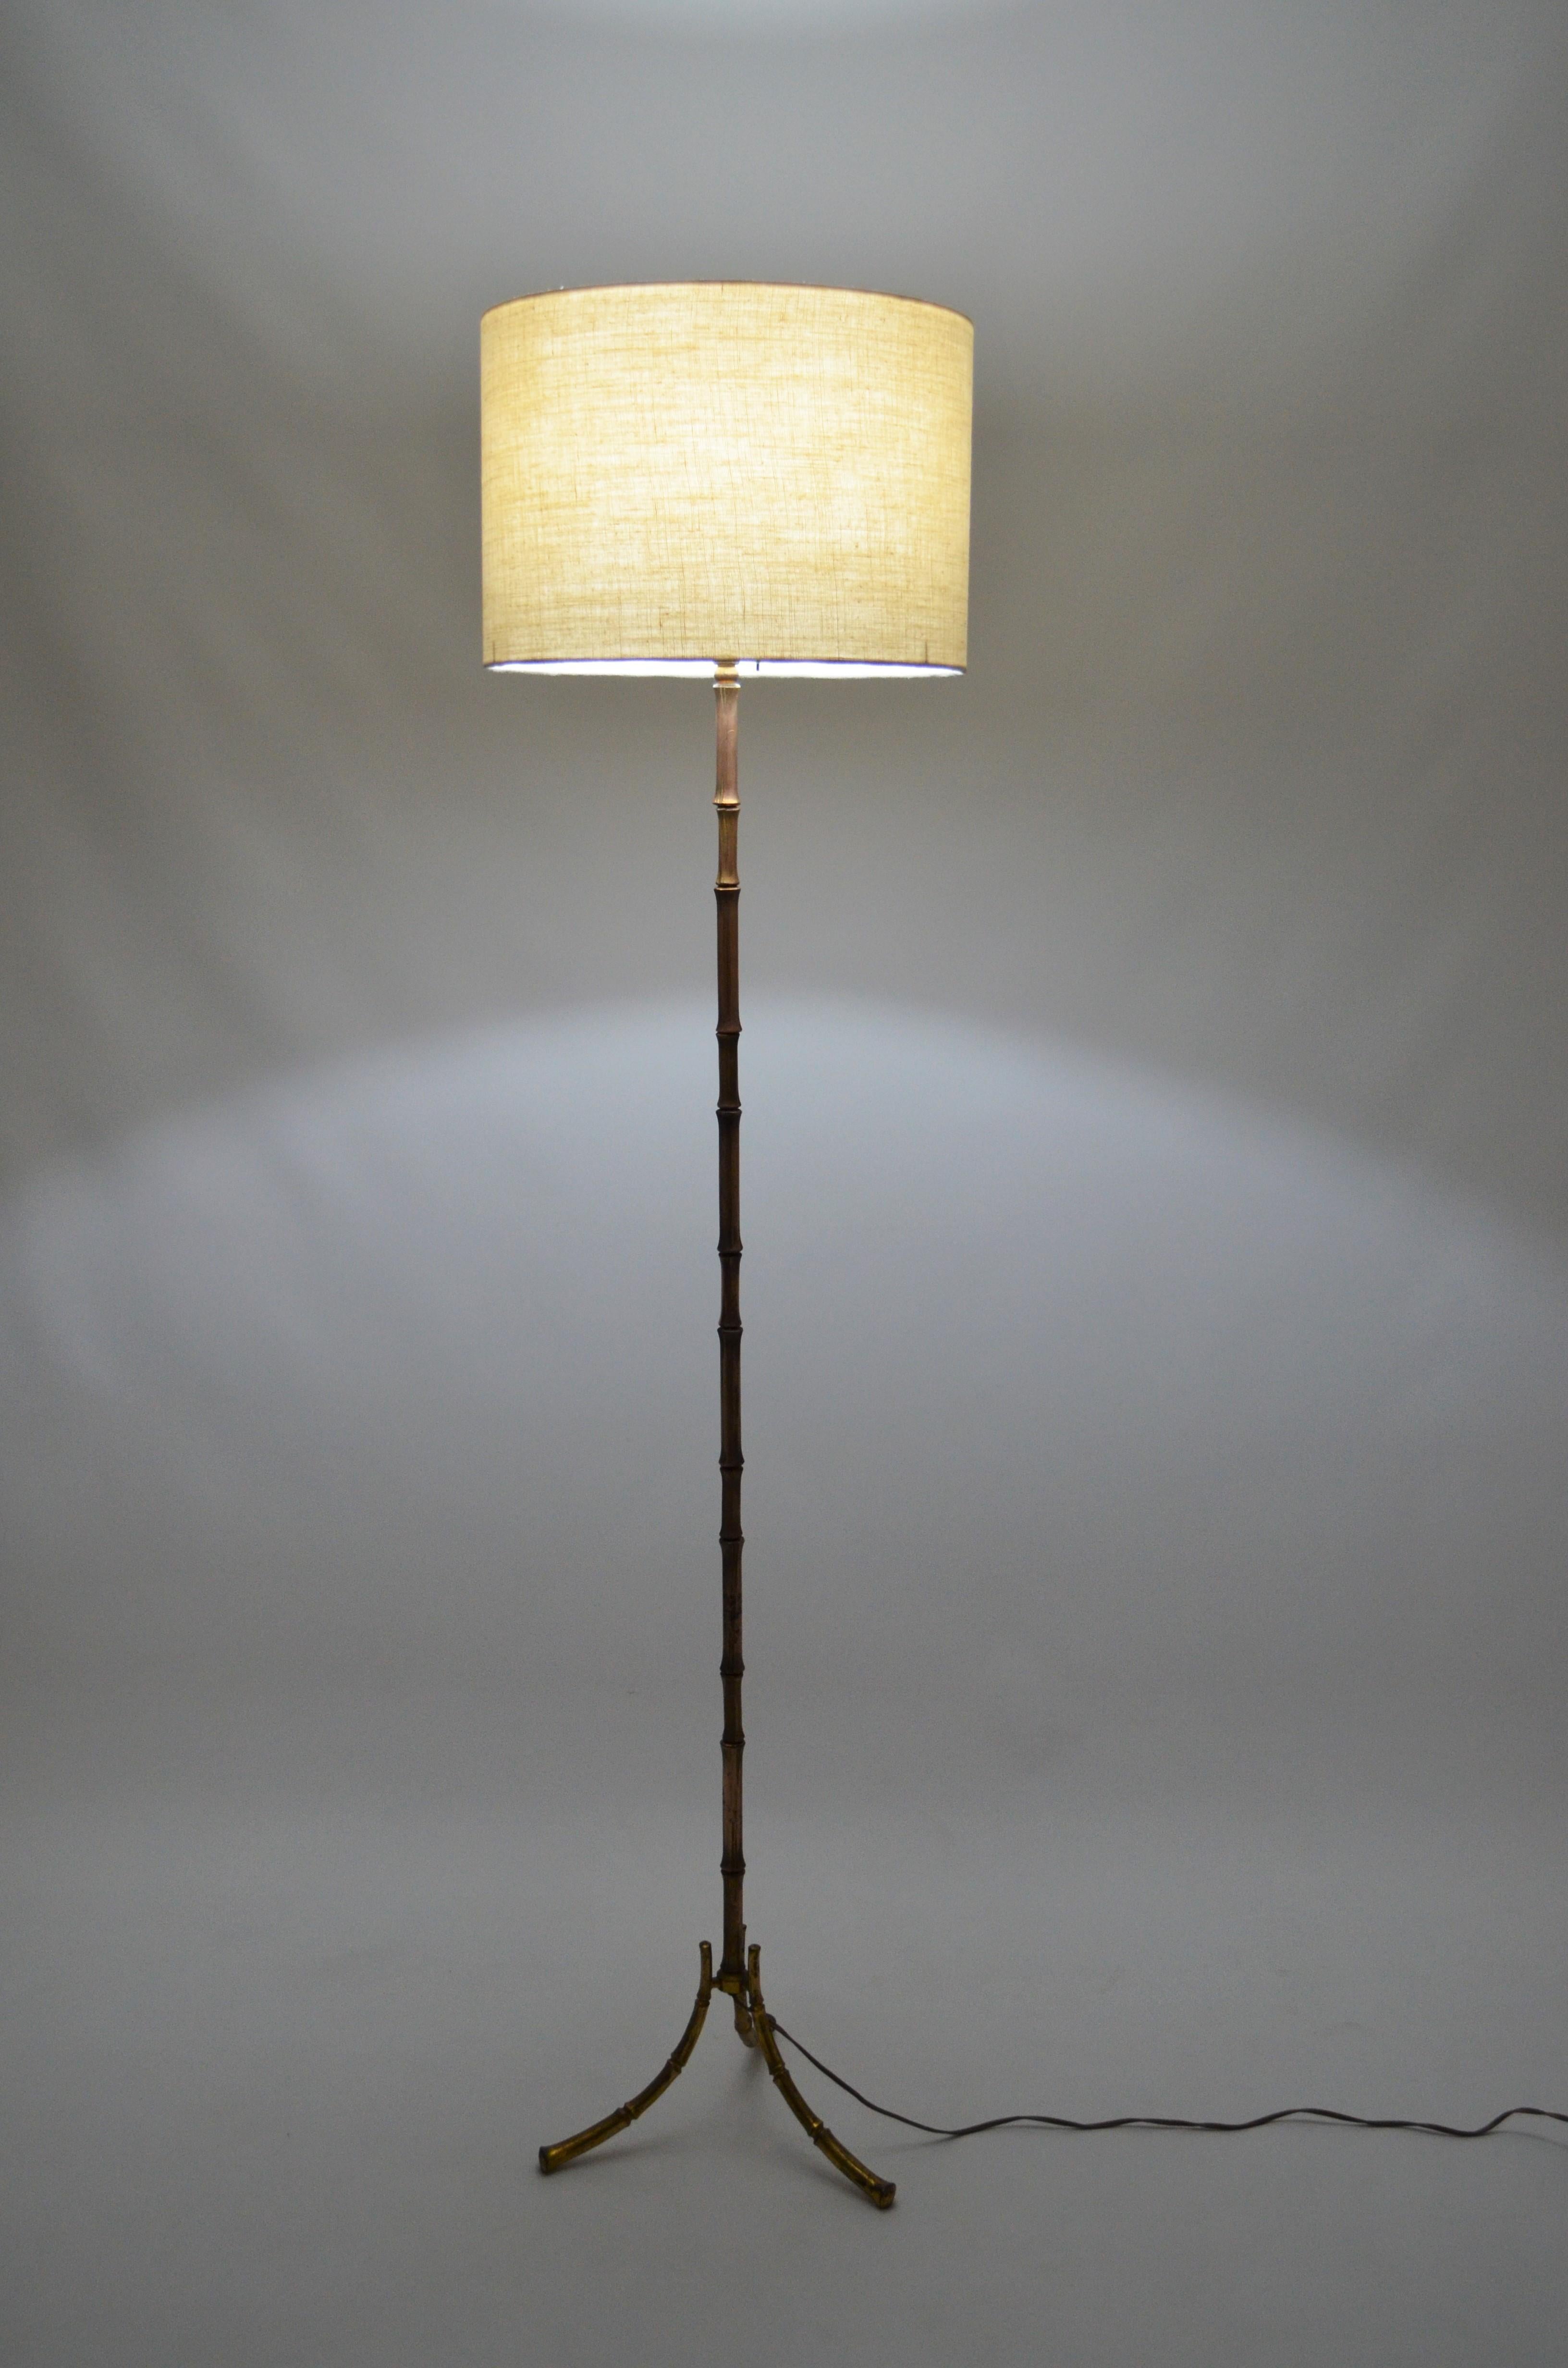 Tripod floor lamp in bronze produced by Maison Baguès, France.
It rests on three curved legs and a central tree imitating bamboo.
The floor lamp has a patina that gives it a lot of charm.
height: 145 cm, 163 cm with the lampshade
Lampshade